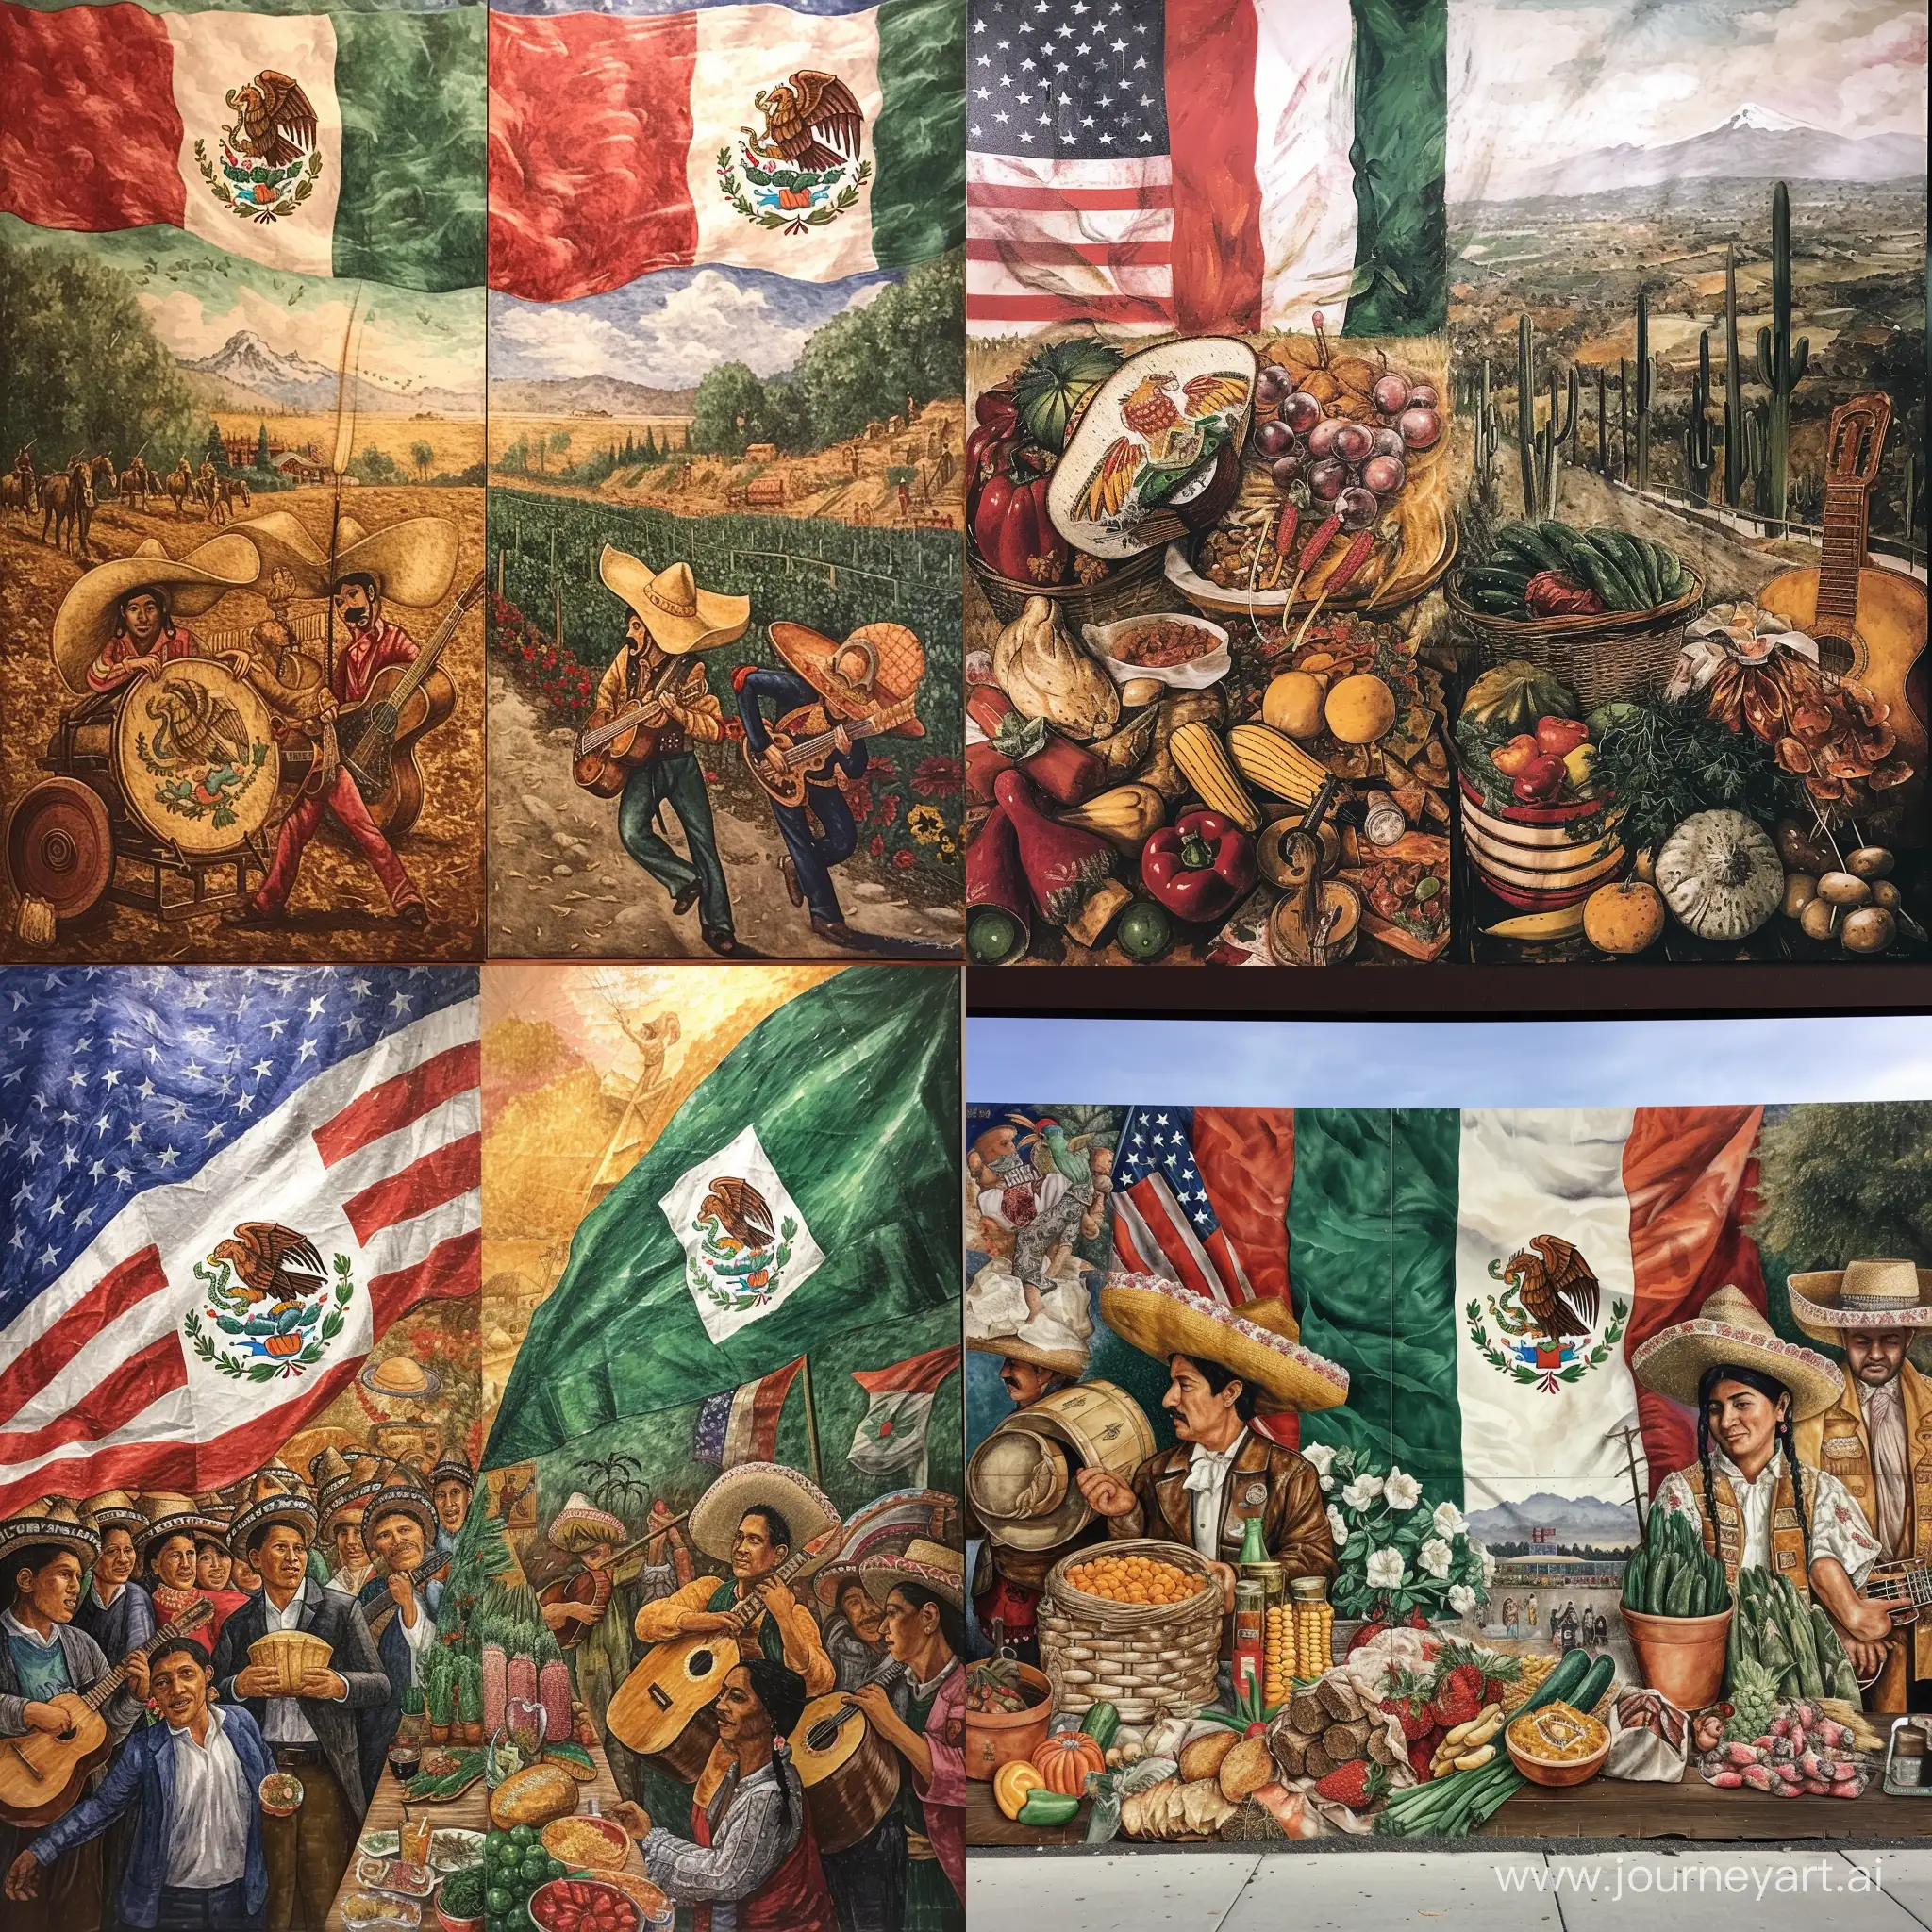 make a mural on mexican immigrants in washington state. Include the mexico flag and the usa flag. Include the pull factors like agriculture and push factors such as bad economy. Also include their mariachi bands, traditional food and music.